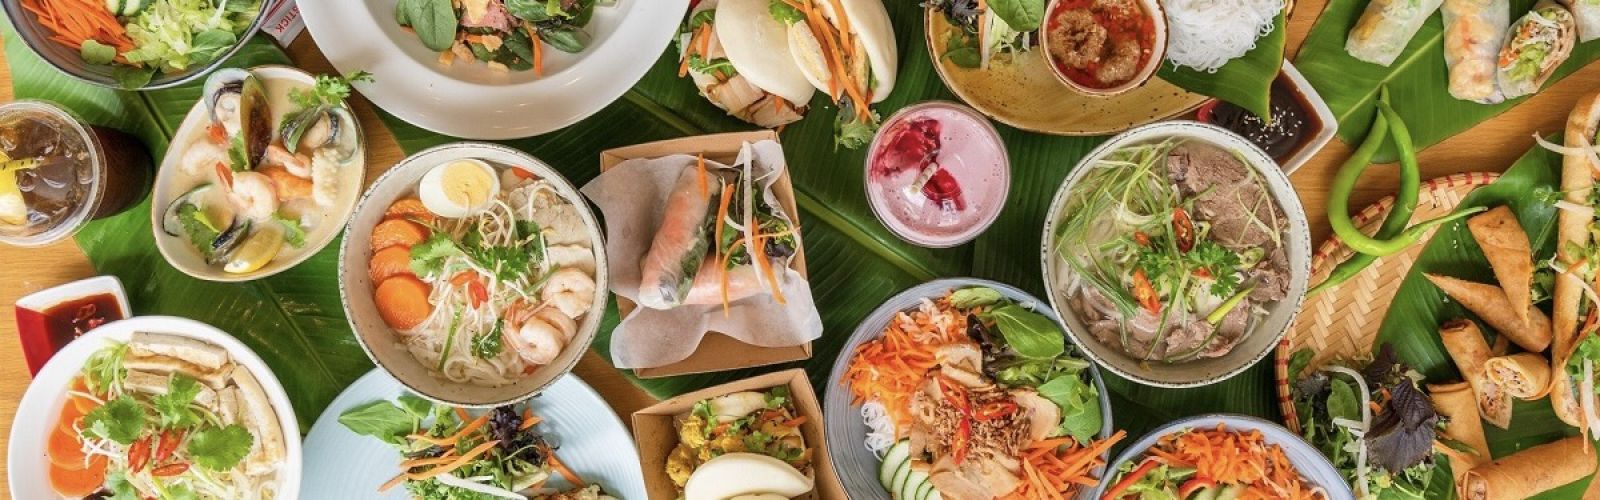 What To Eat in Koh Samui